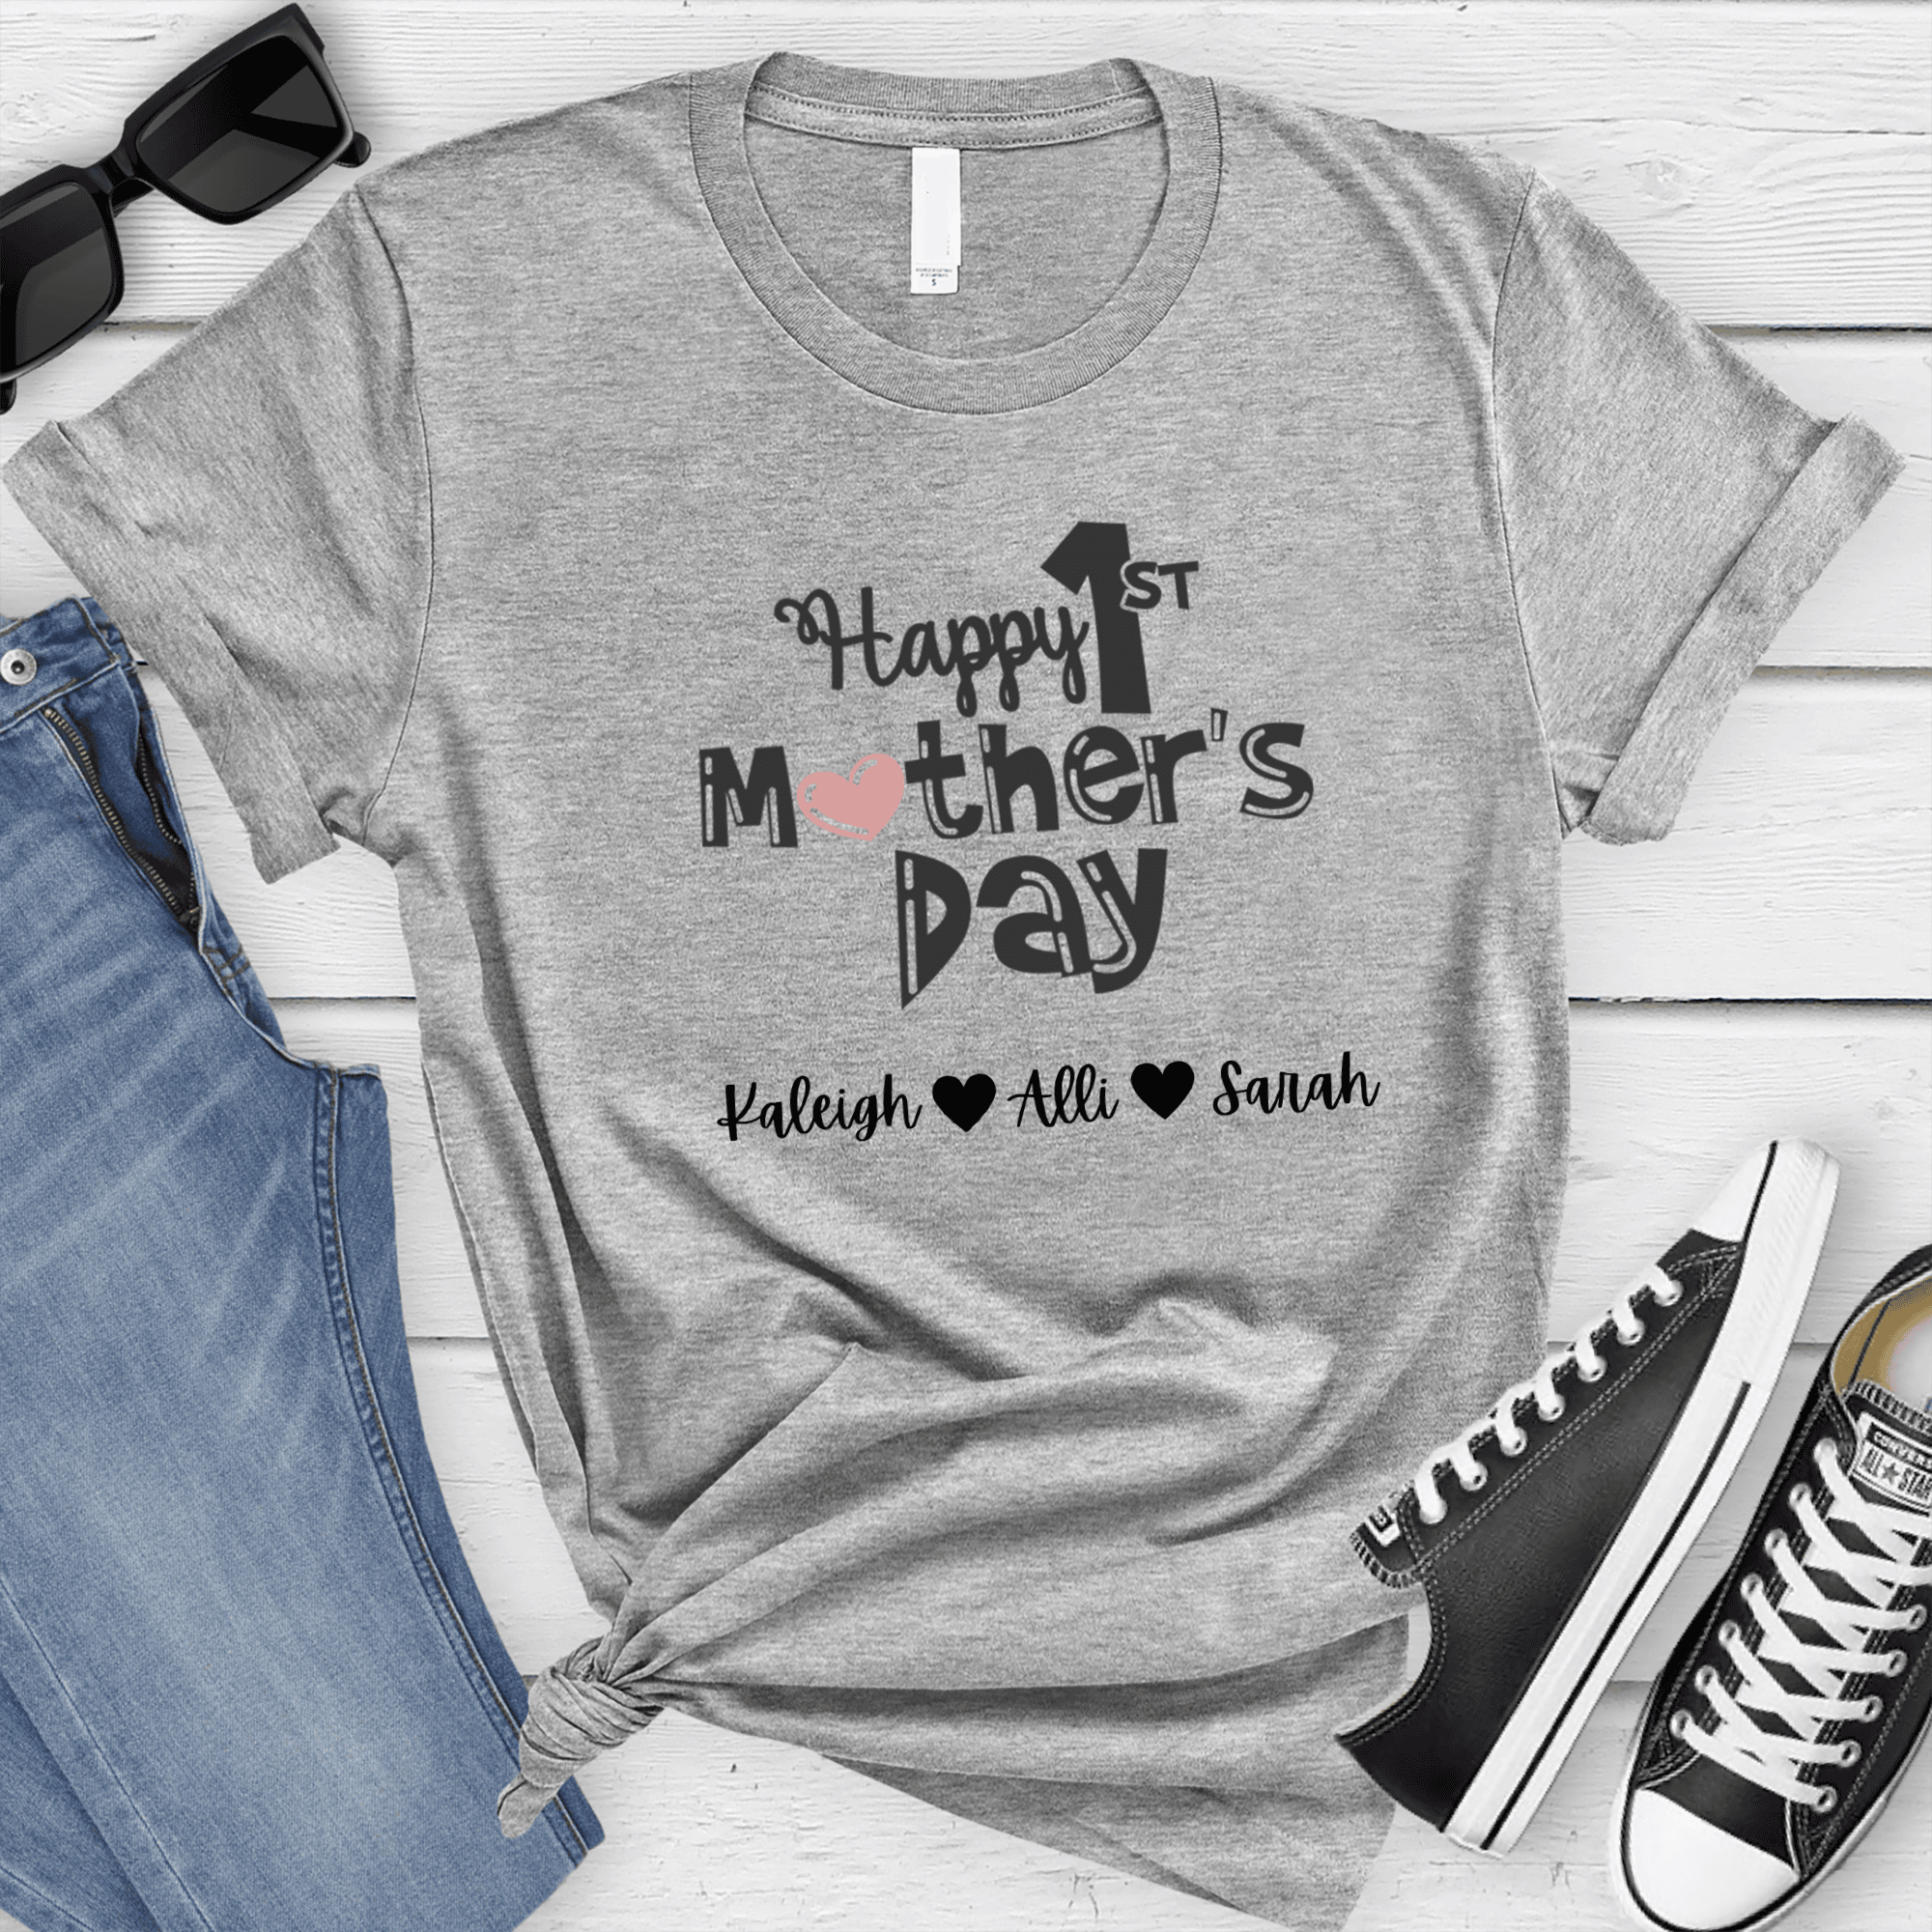 Womens Grey T Shirt with First-Mothers-Day design